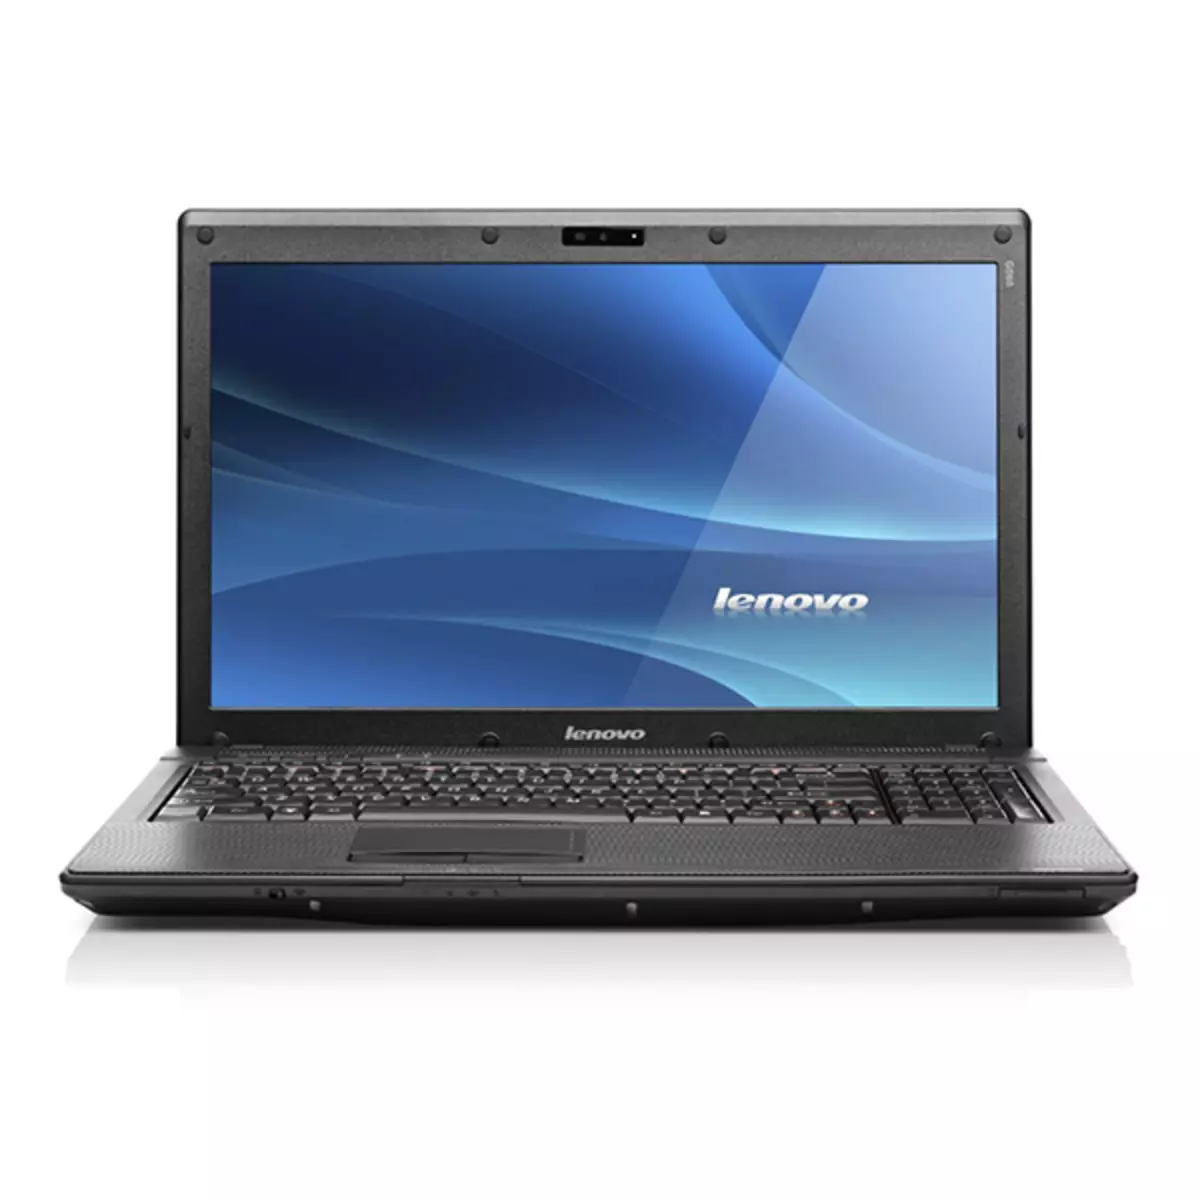 Download Drivers for Lenovo G560